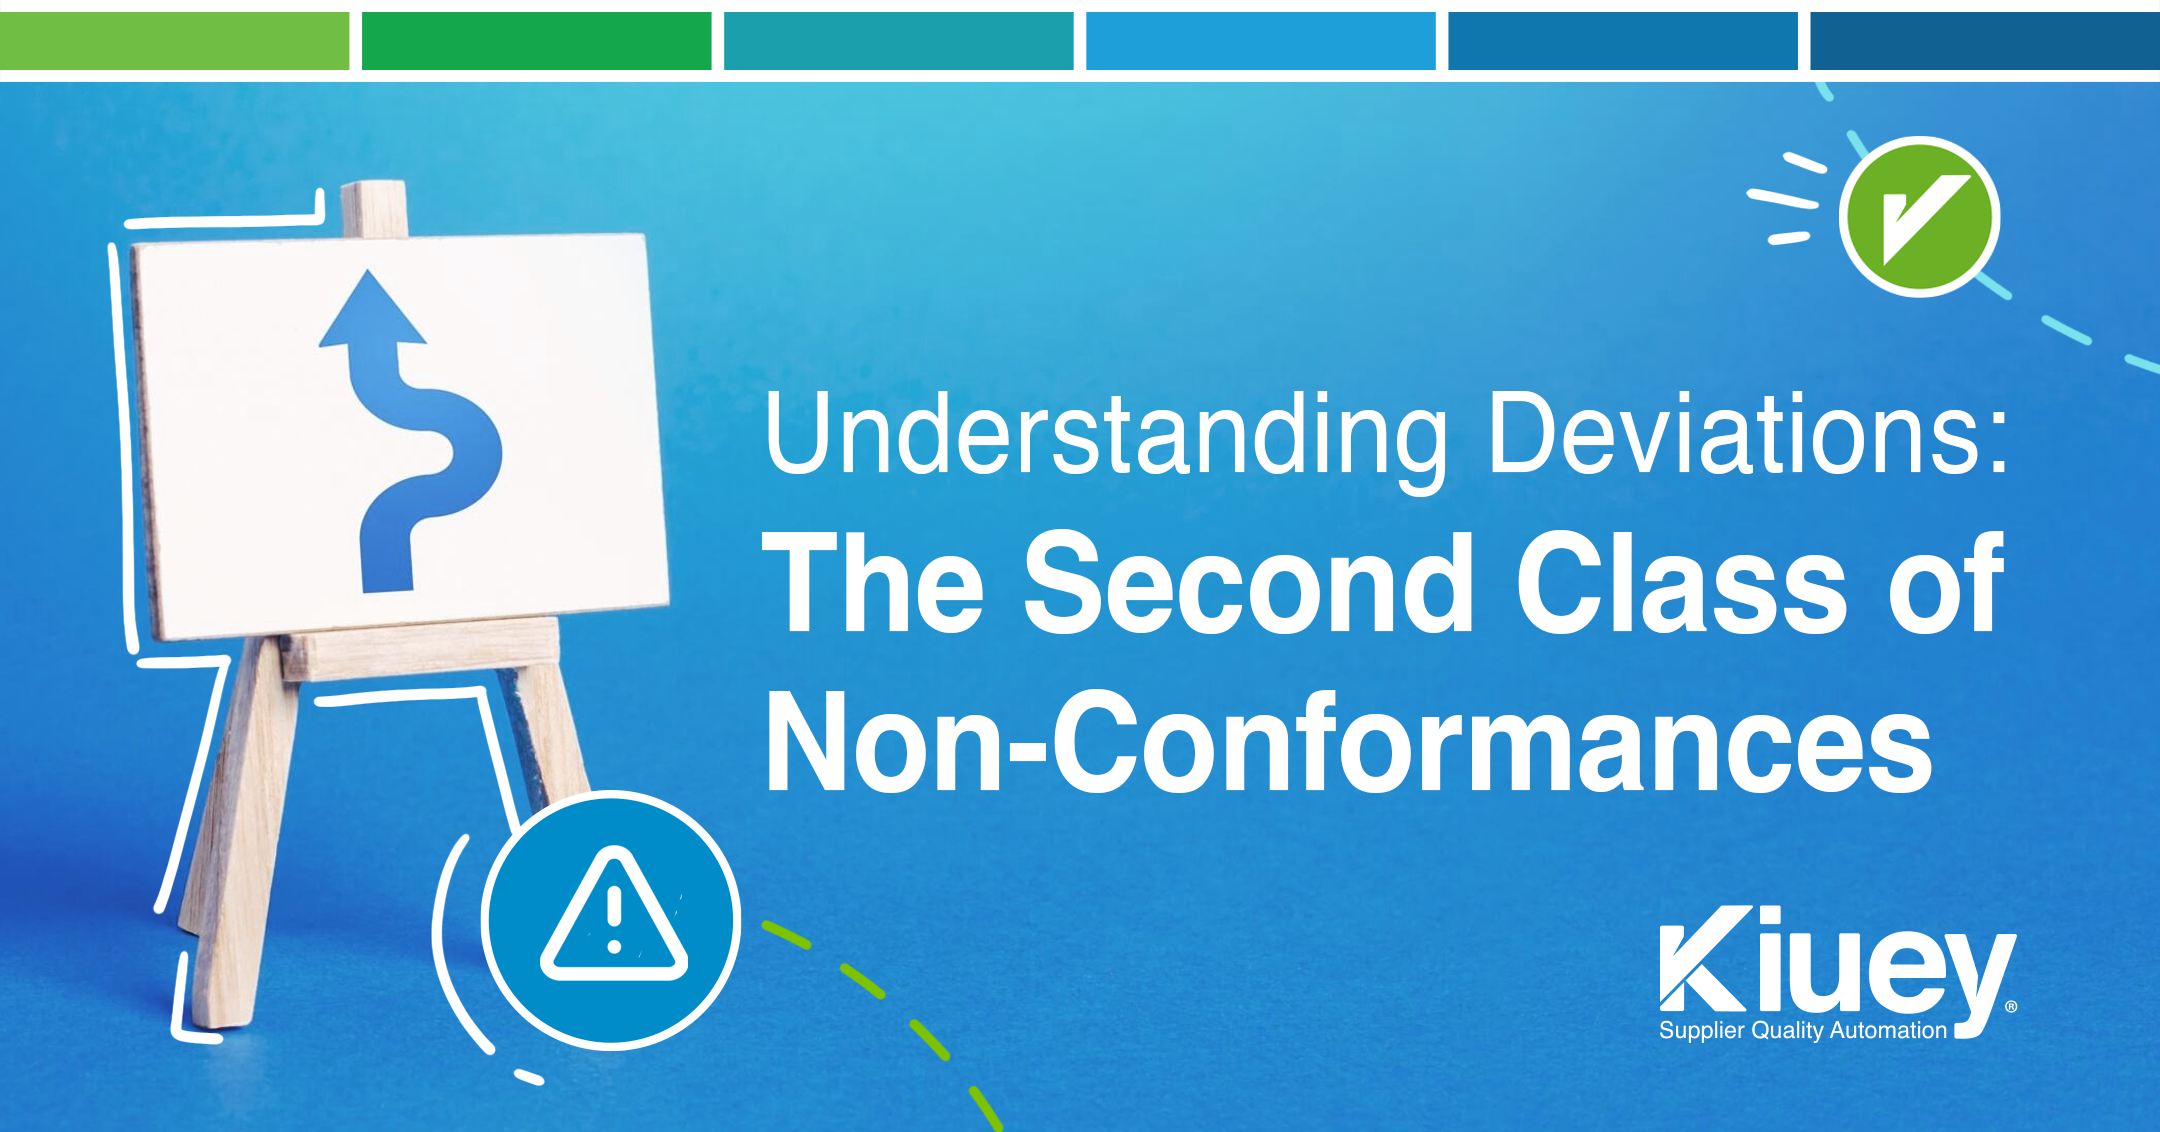 Understanding Deviations (Issues) in Manufacturing: The Second Class of Non-Conformances